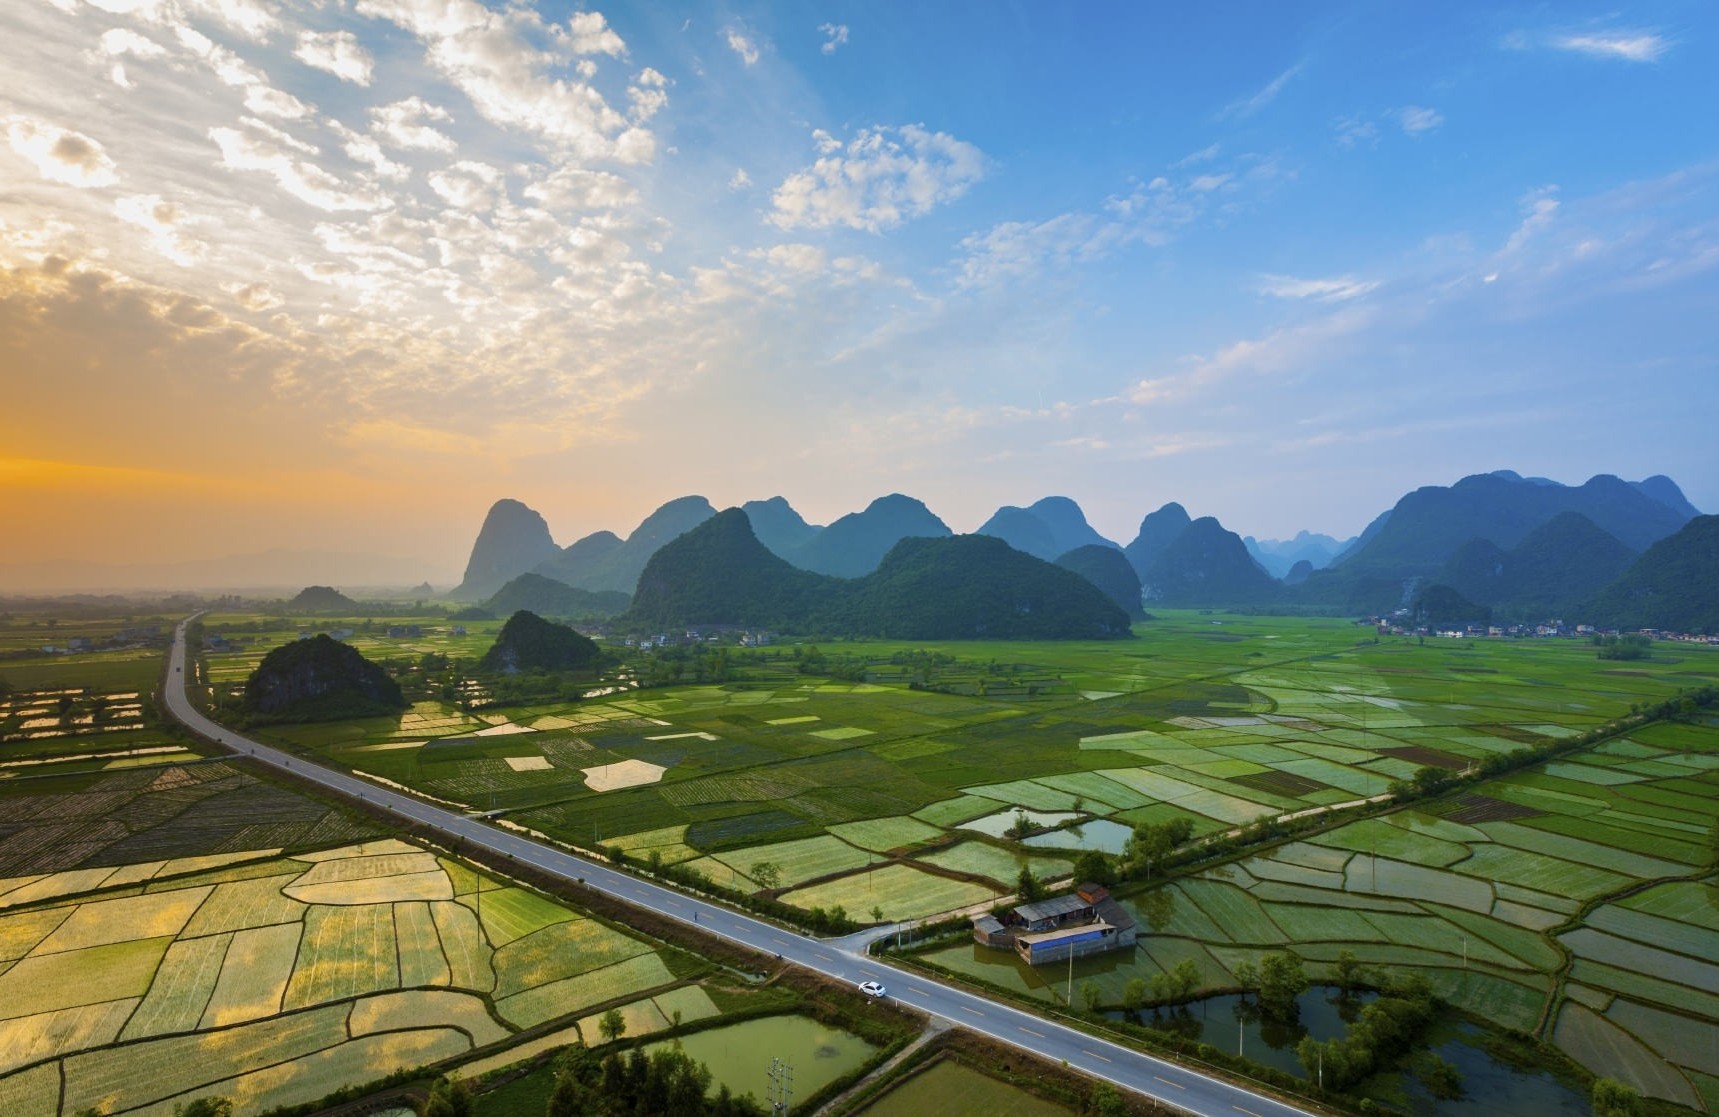 landscape, Photography, Nature, Field, Mountains, Sunset, Road, Clouds, Village, Guilin, China, Rice Paddy Wallpaper